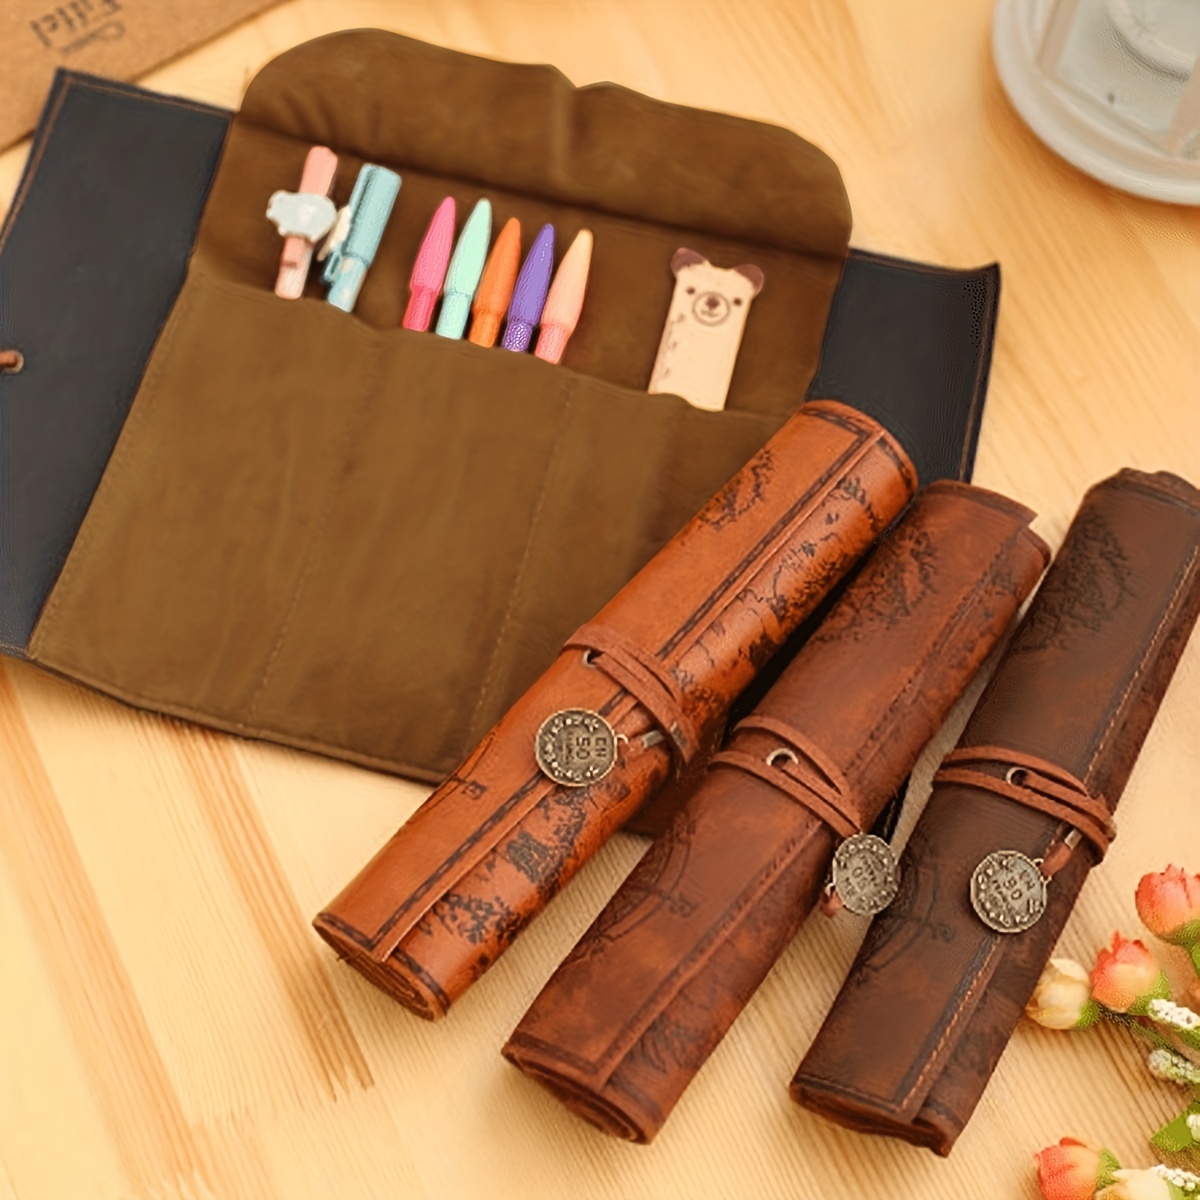 Leather Pencil Roll, Pen Case, Artist Roll, Gift for Painter